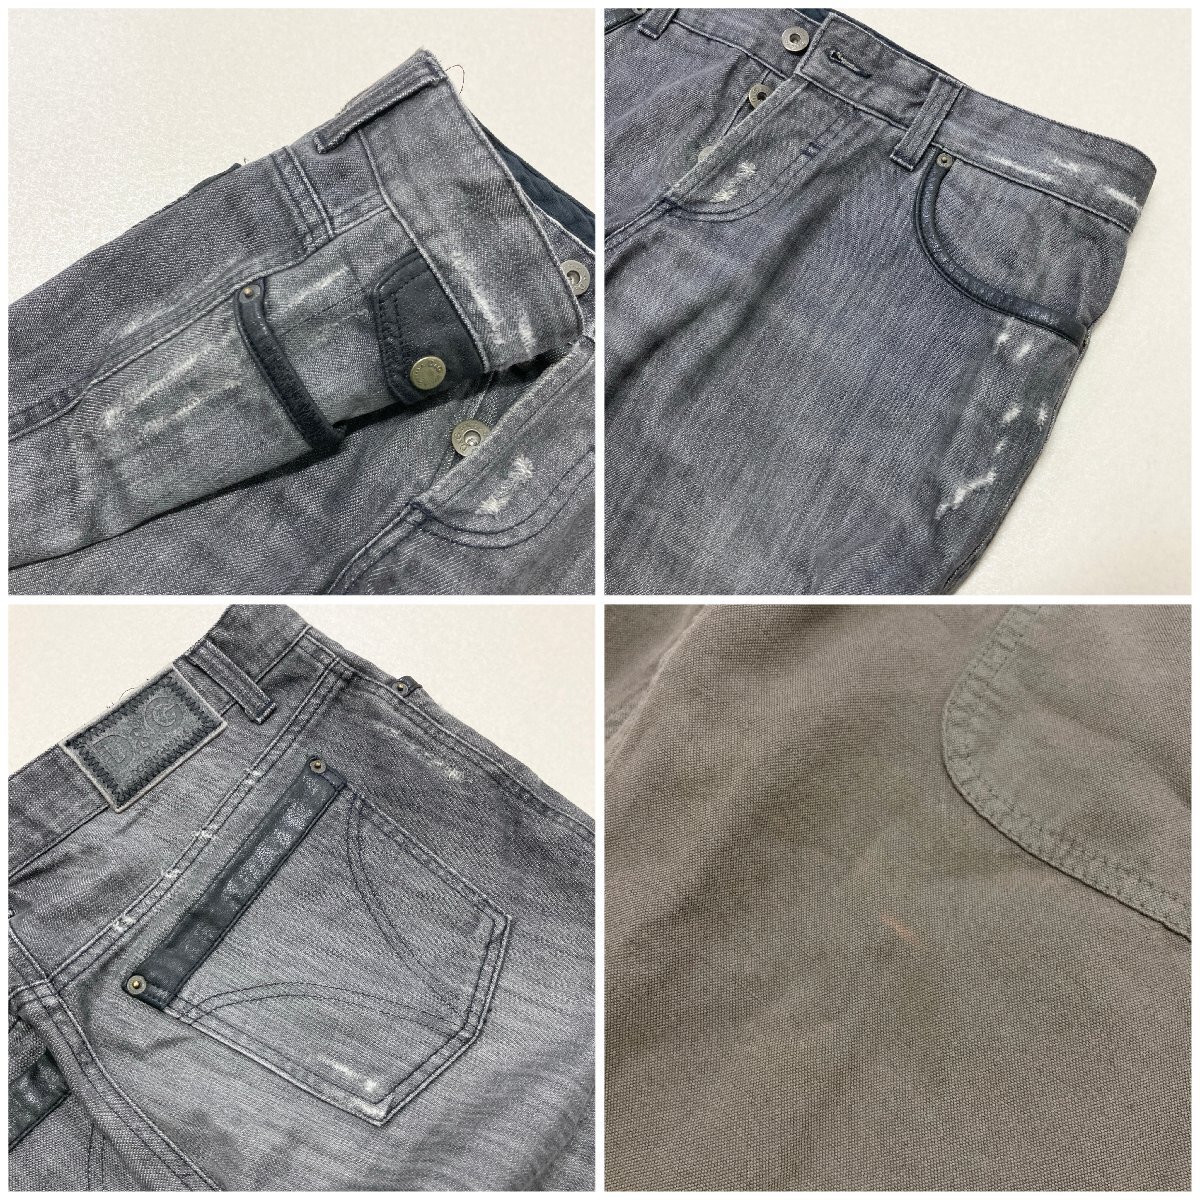 *DOLCE&GABBANA Dolce and Gabbana 3 point pants Denim button fly Italy made Turkey made men's size MIX. present condition goods 1.67kg*